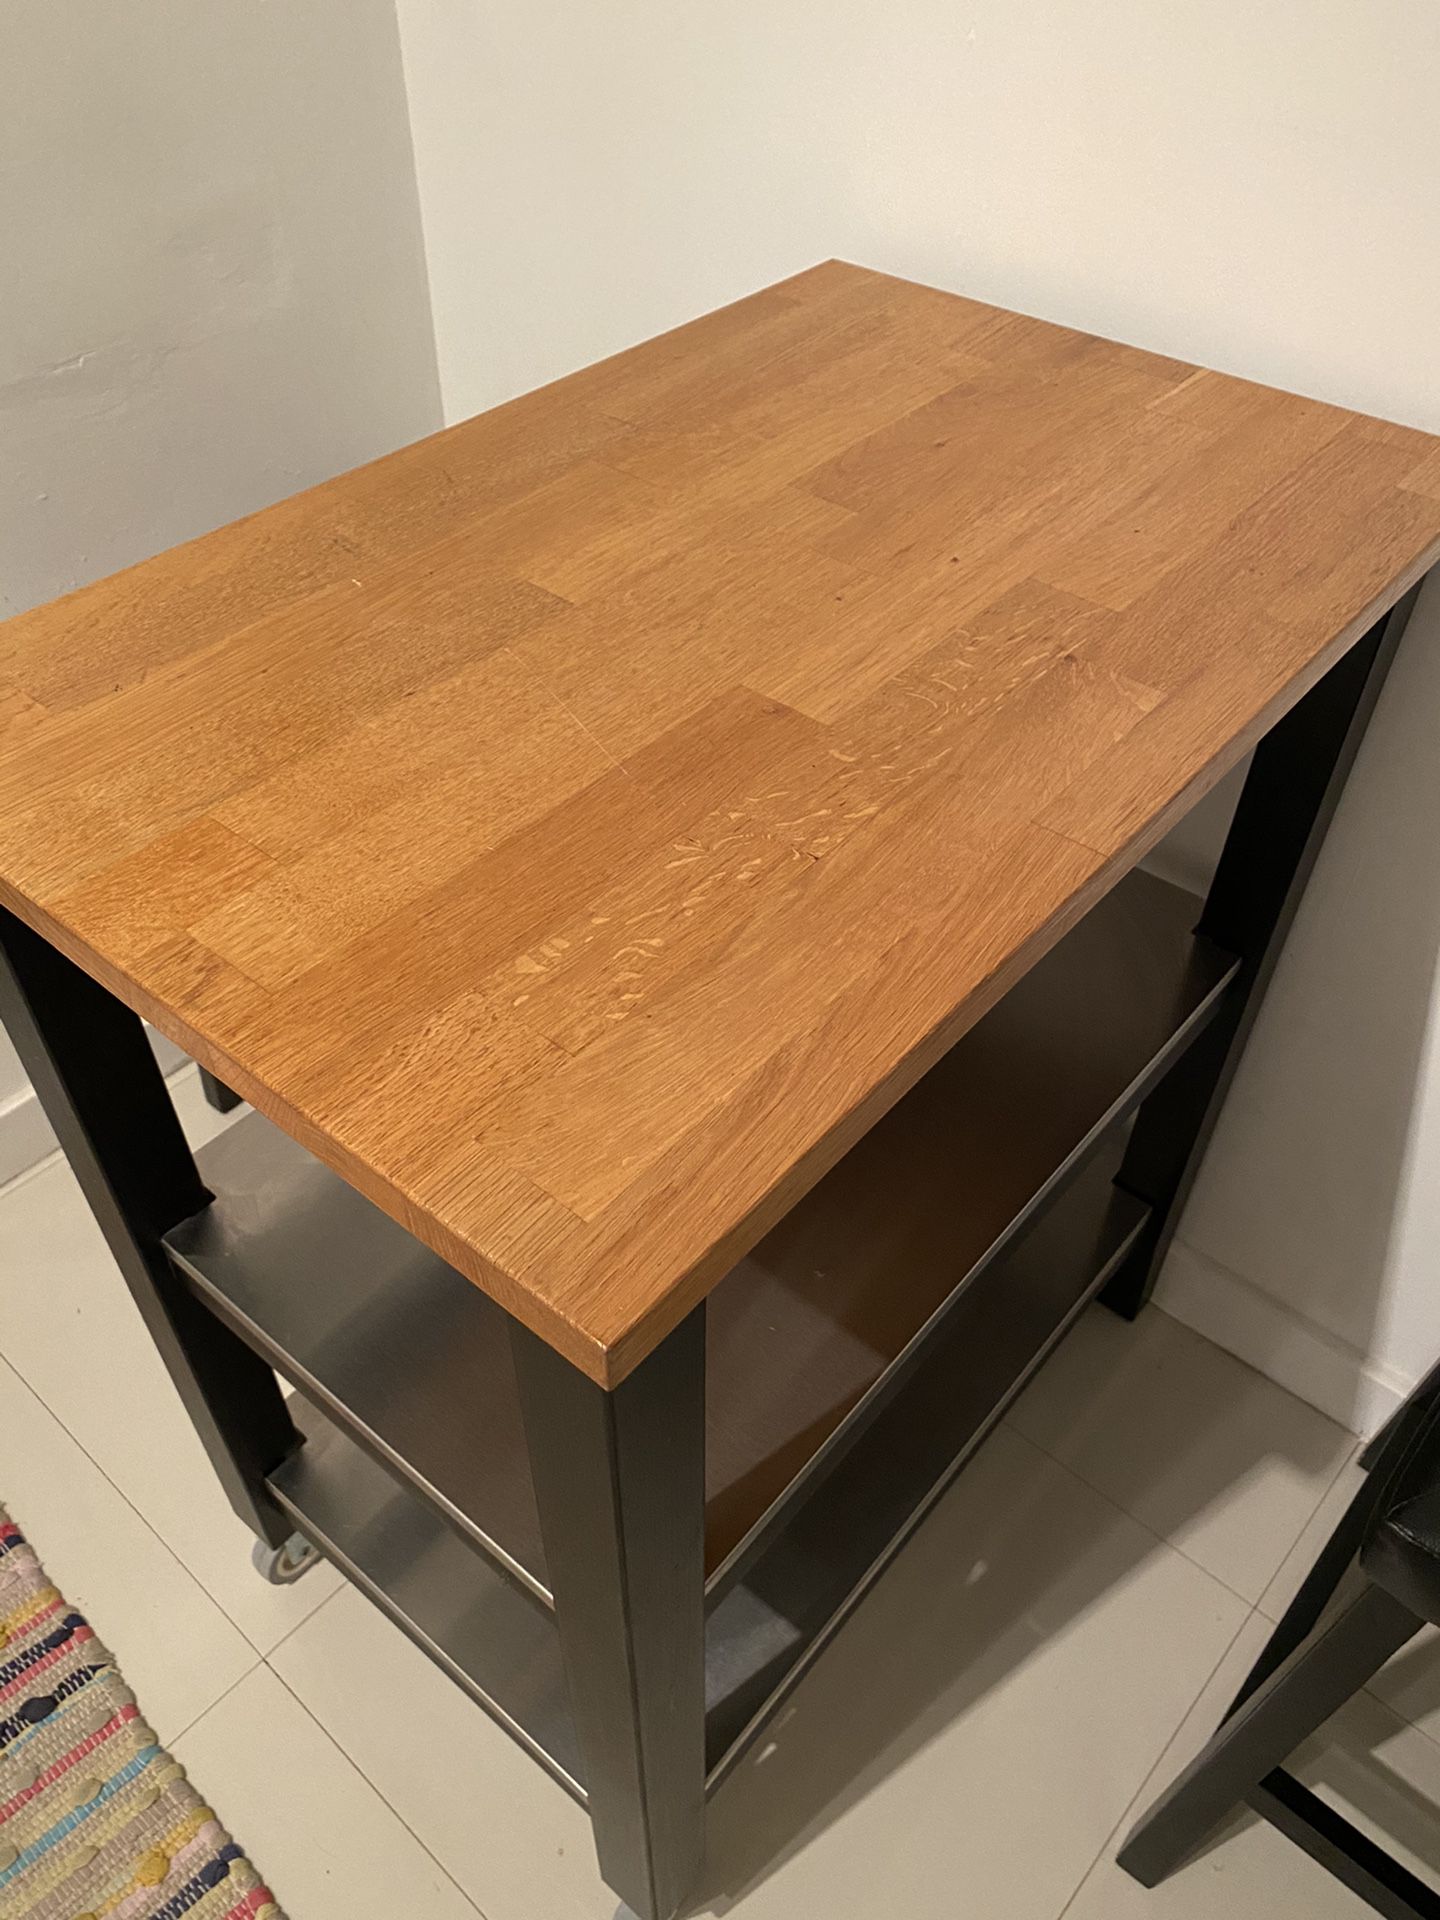 Great IKEA kitchen Table - Almost new